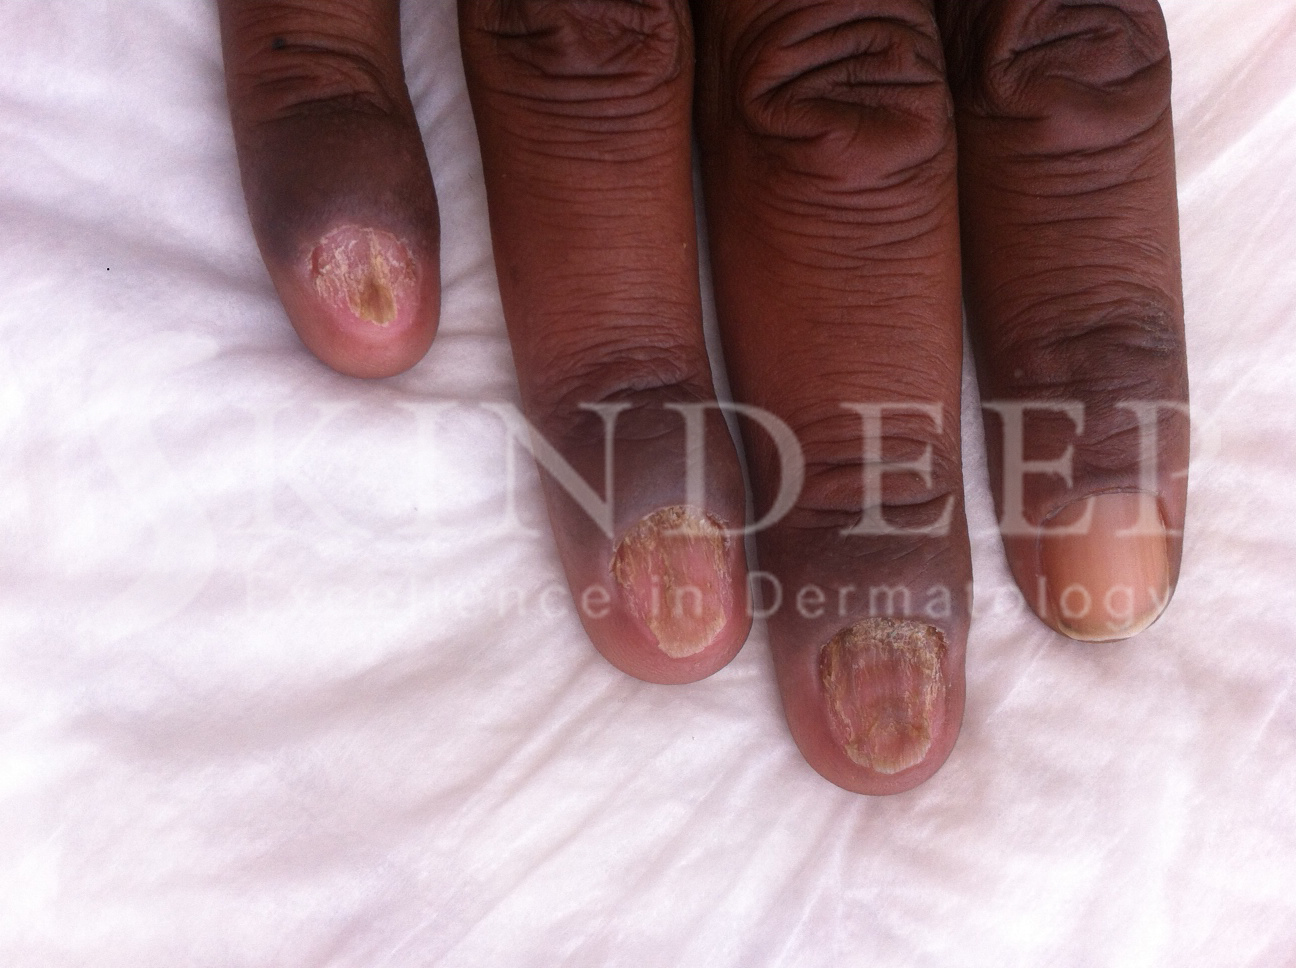 Candidiasis of a fingernail - Stock Image - C047/0371 - Science Photo  Library